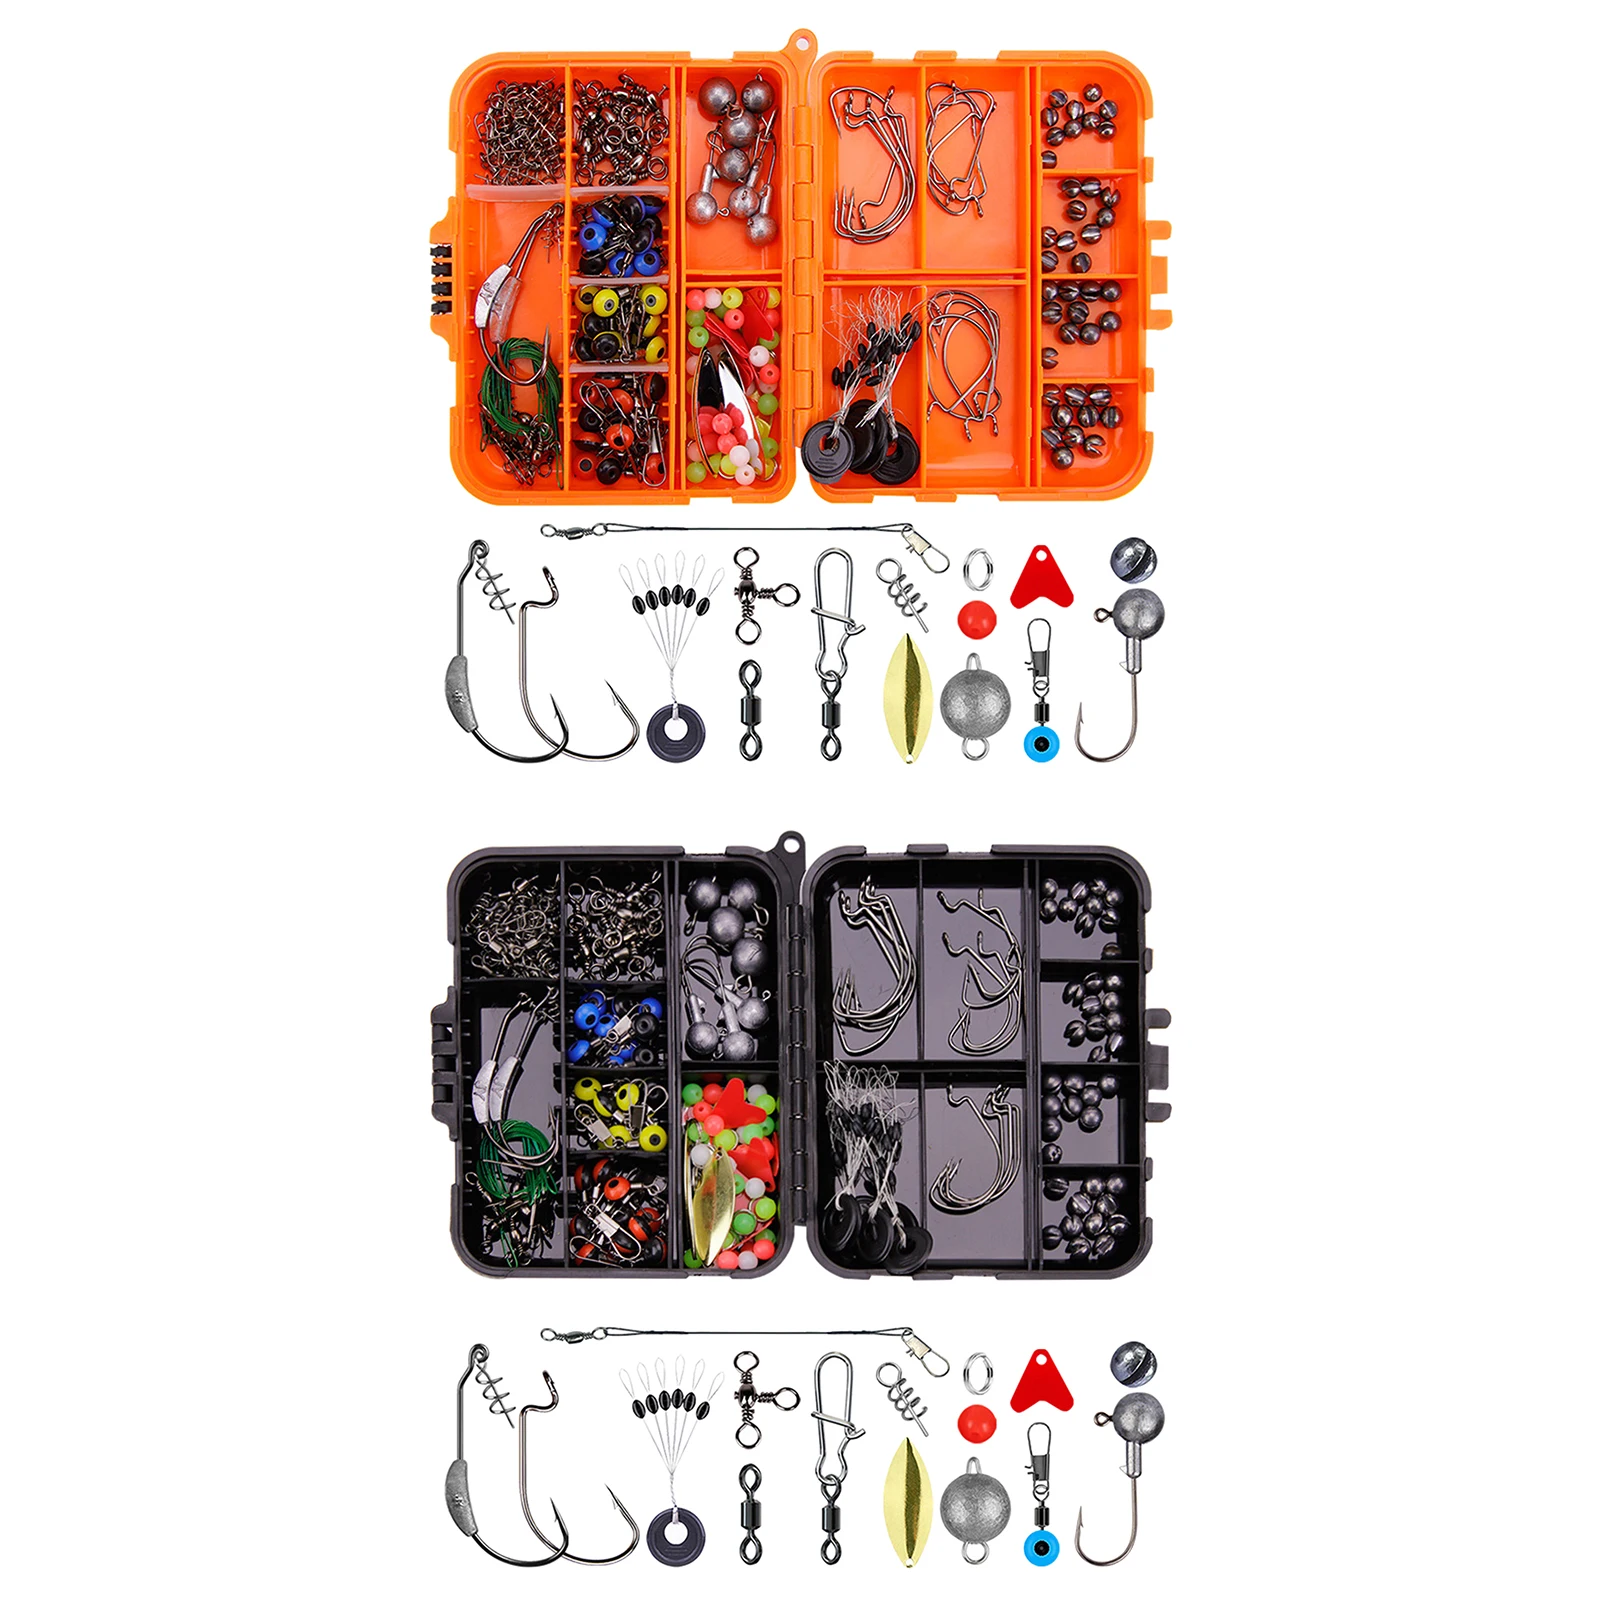 Fishing Tackle Accessories Kit 213pcs with Tackle Fishing Sinkers Equipment